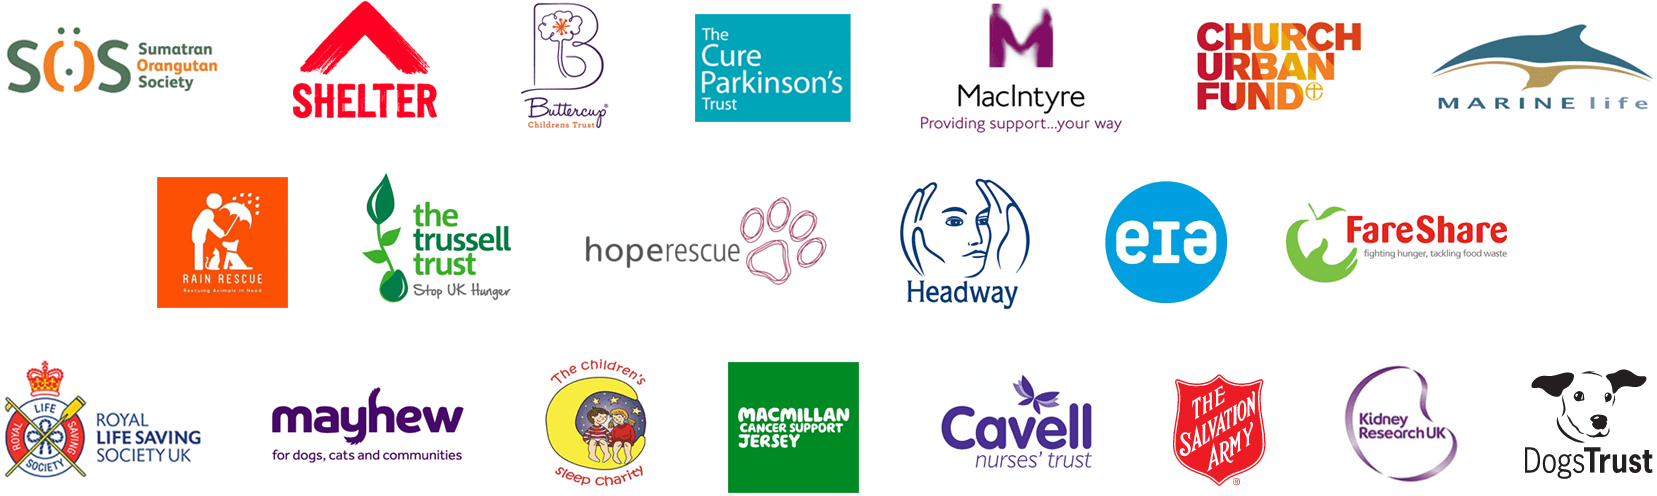 Charity partners